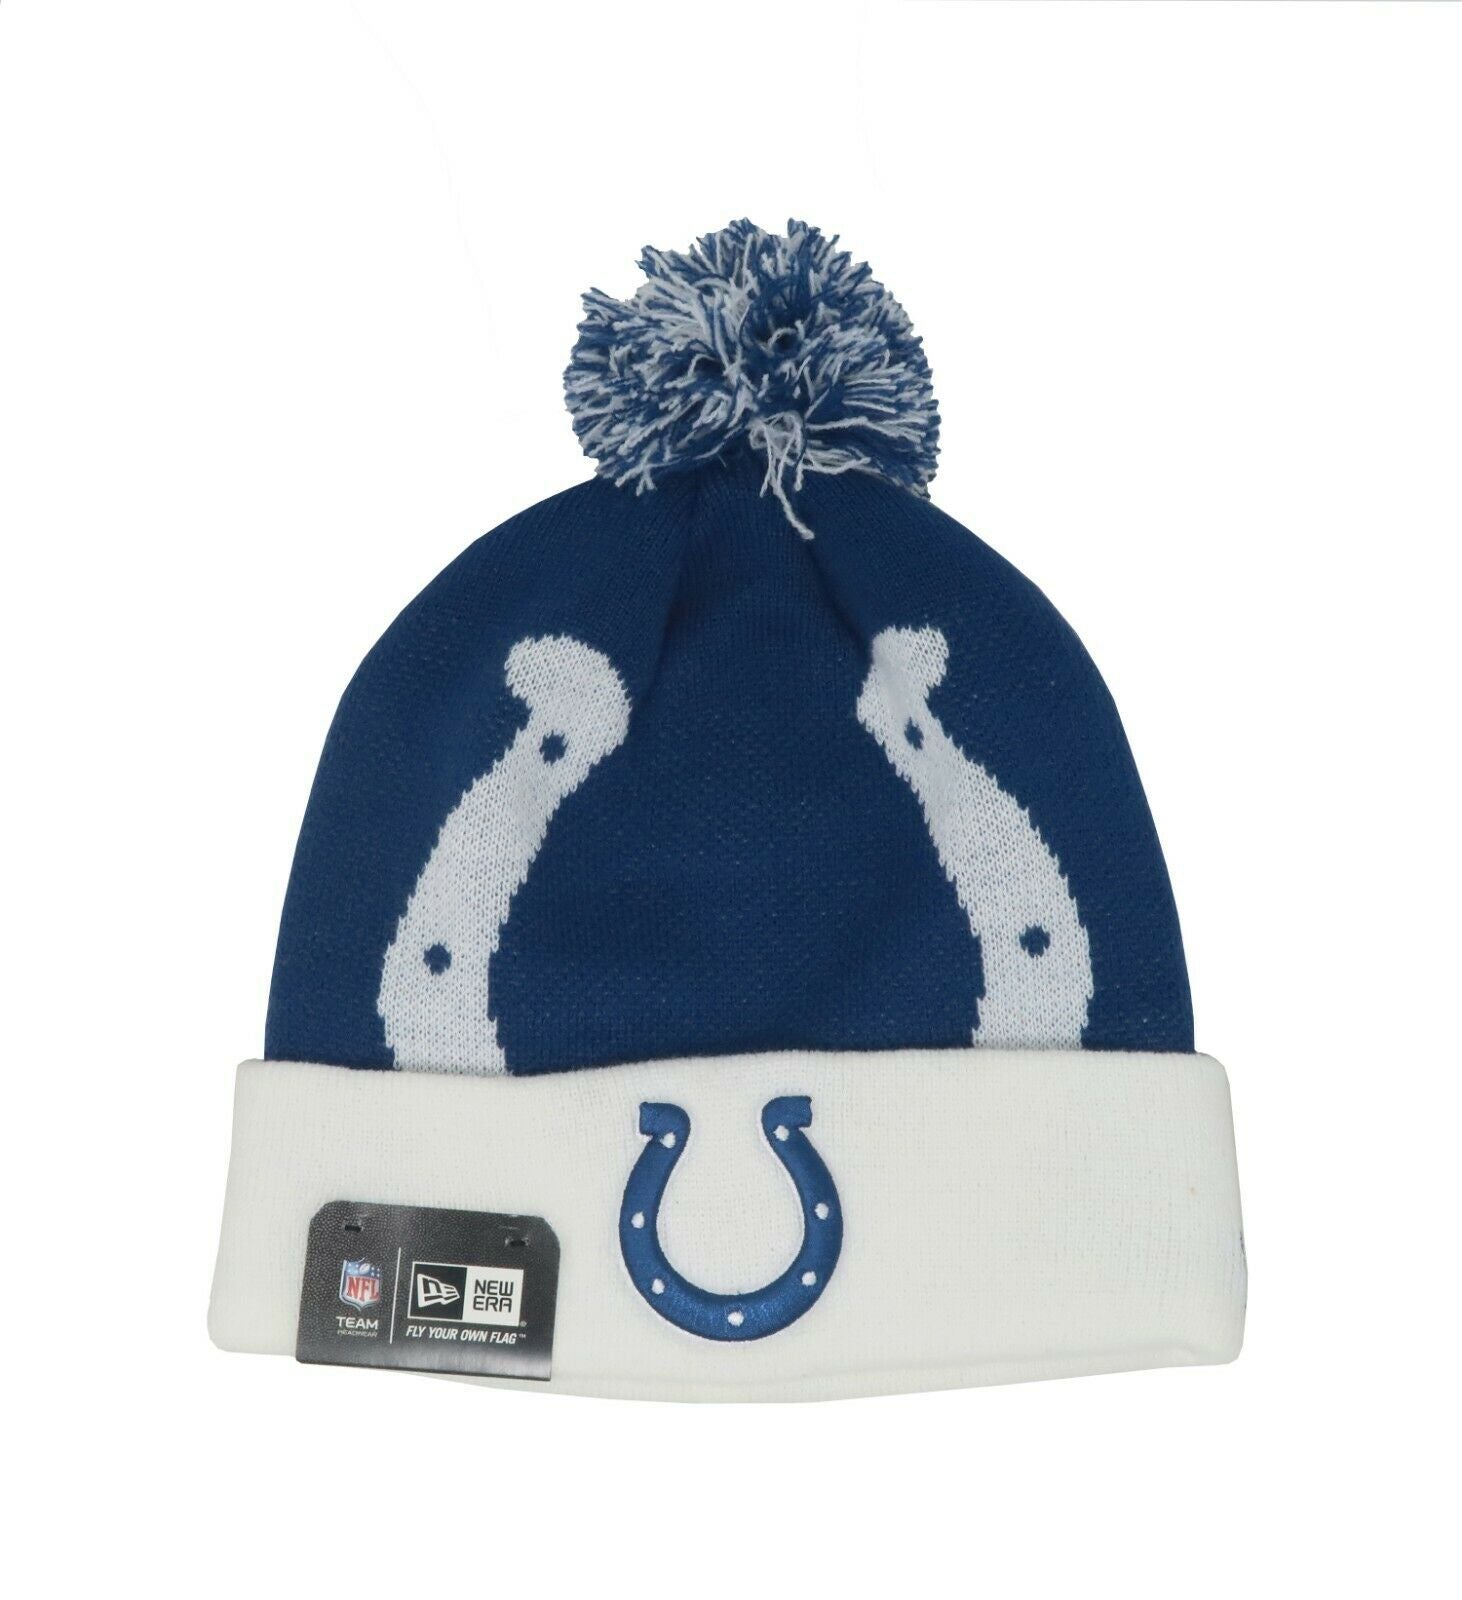 New Era NFL Indianapolis Colts Beanie Royal Blue White Pom Knit Hat